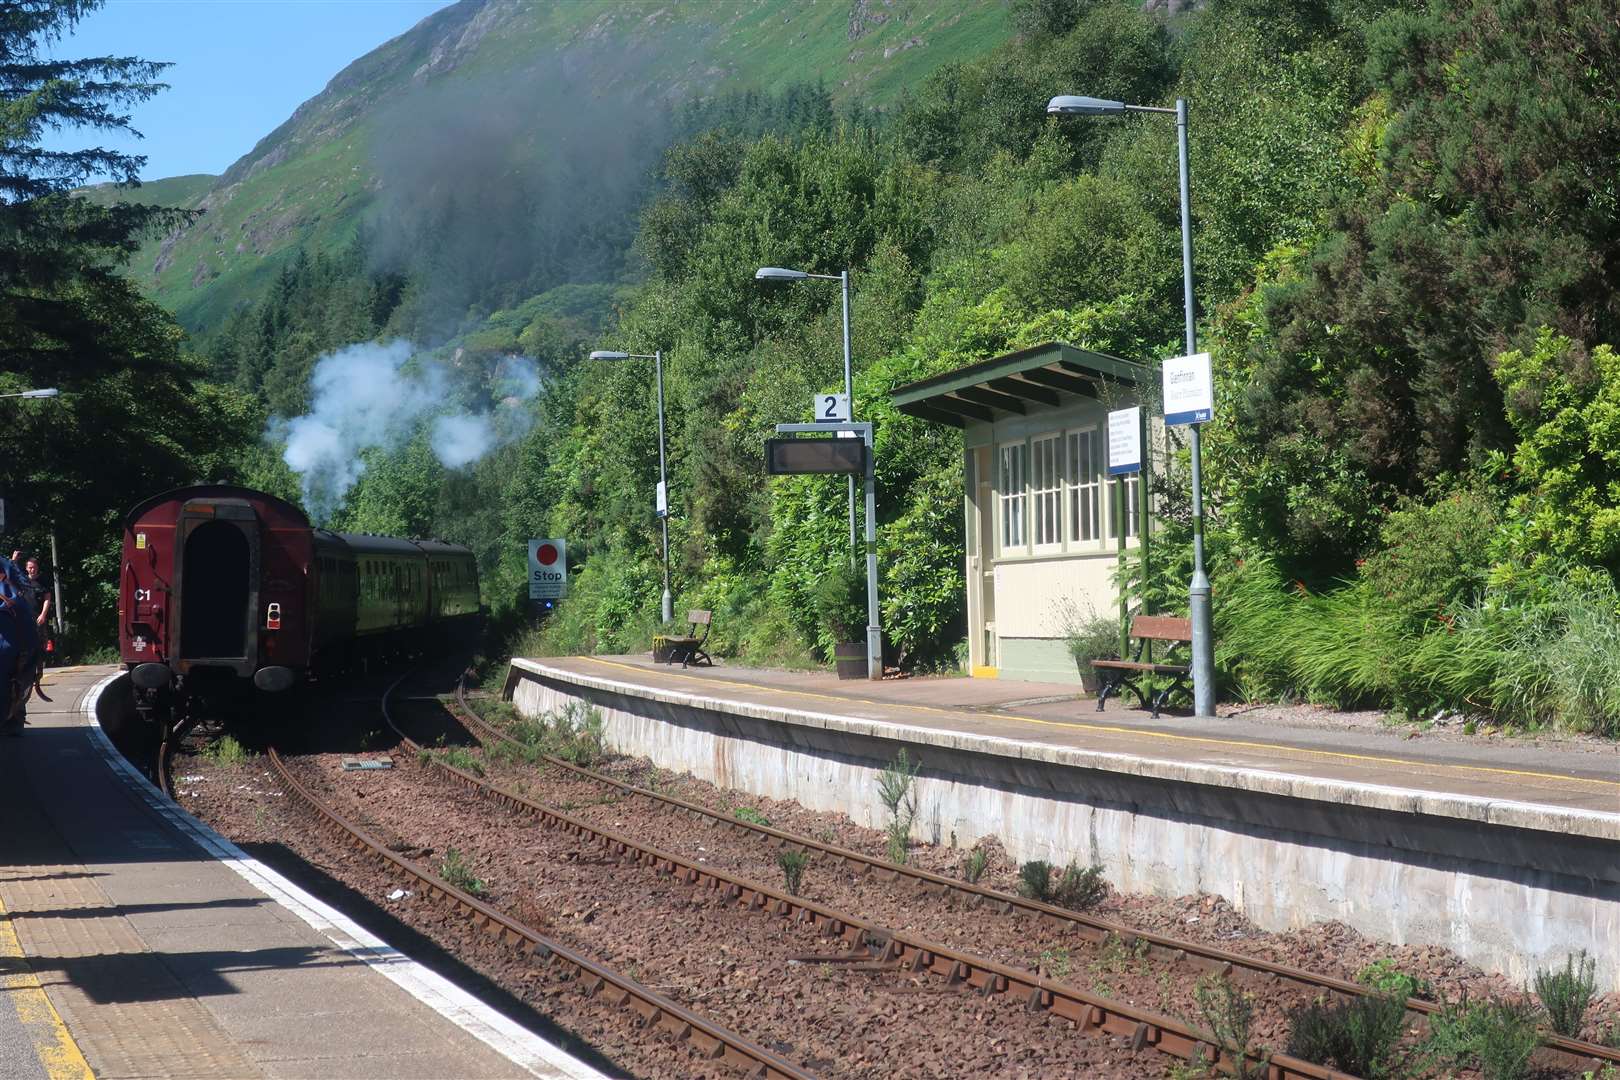 The Jacobite train leaves Glenfinnan station in a puff of smoke.